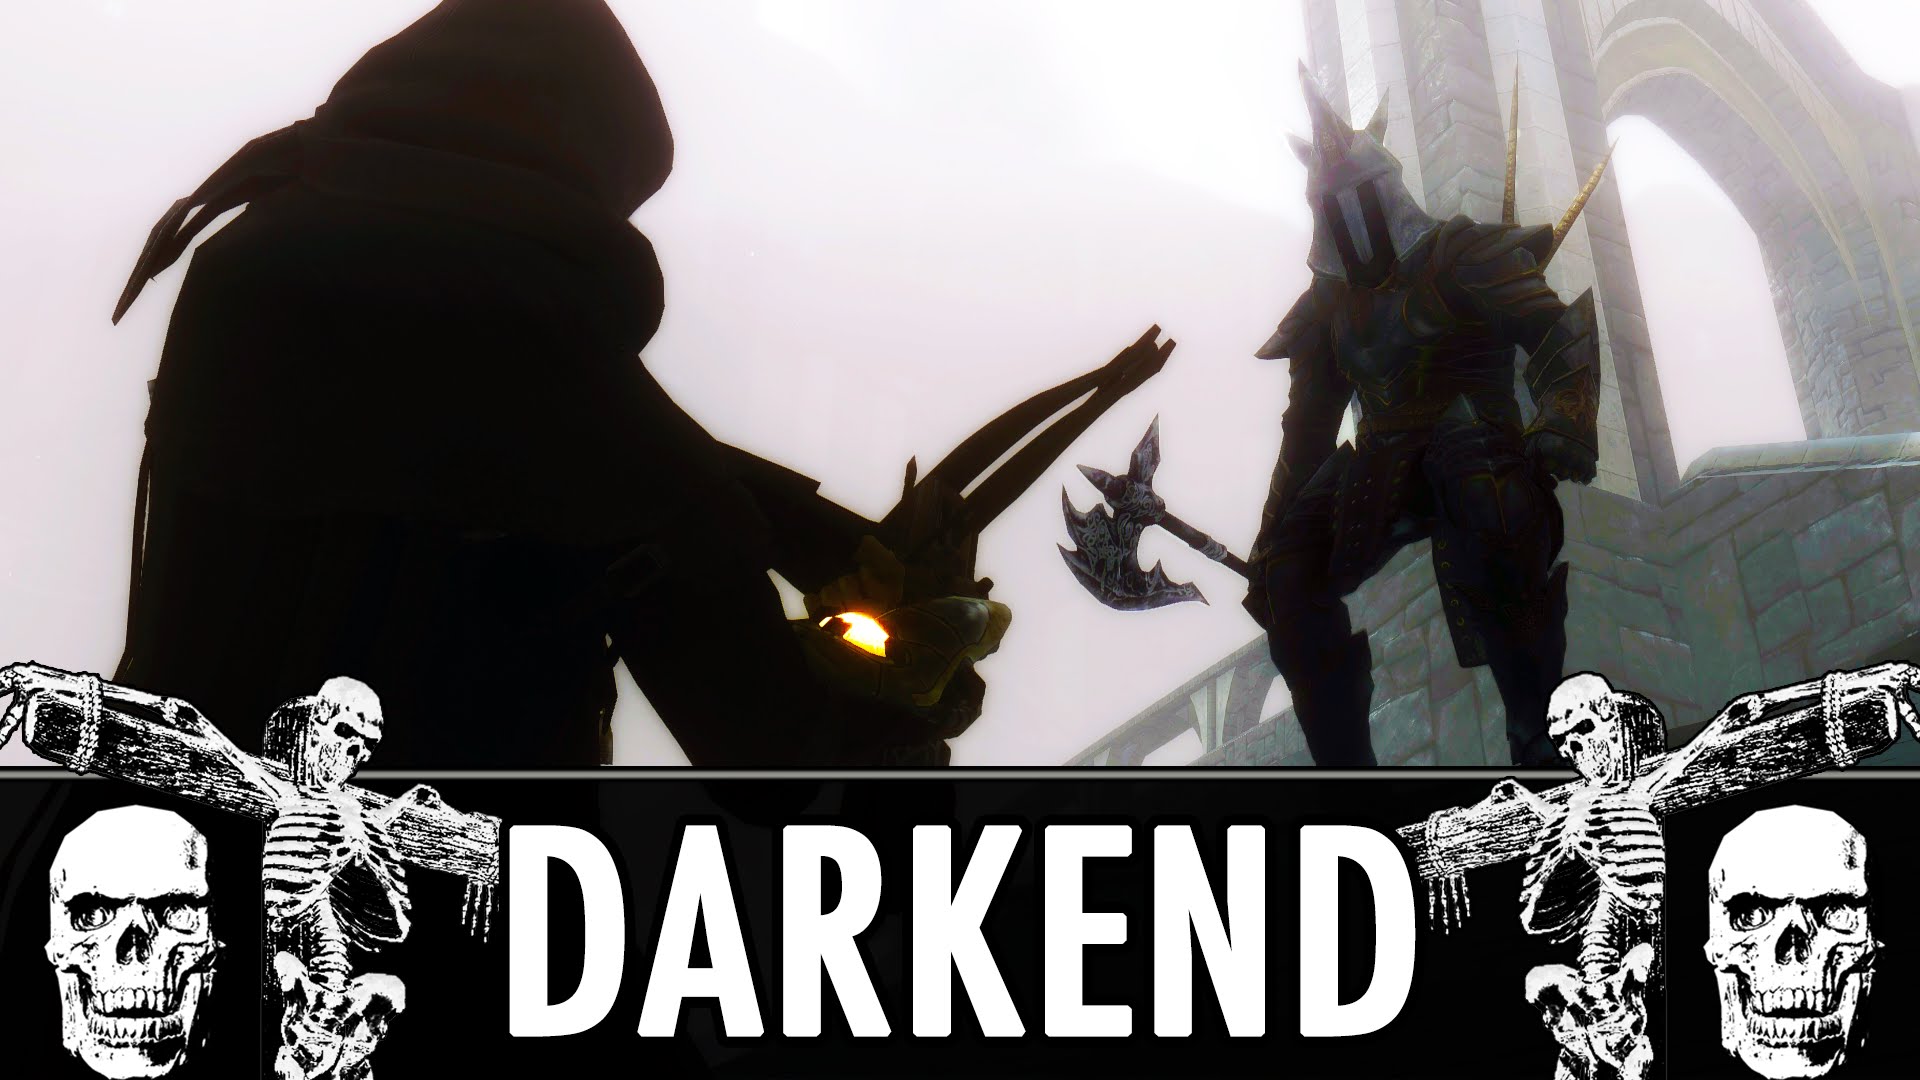 Check Out Darkened A Dark Souls Inspired Mod For Skyrimvideo Game News Online Gaming News